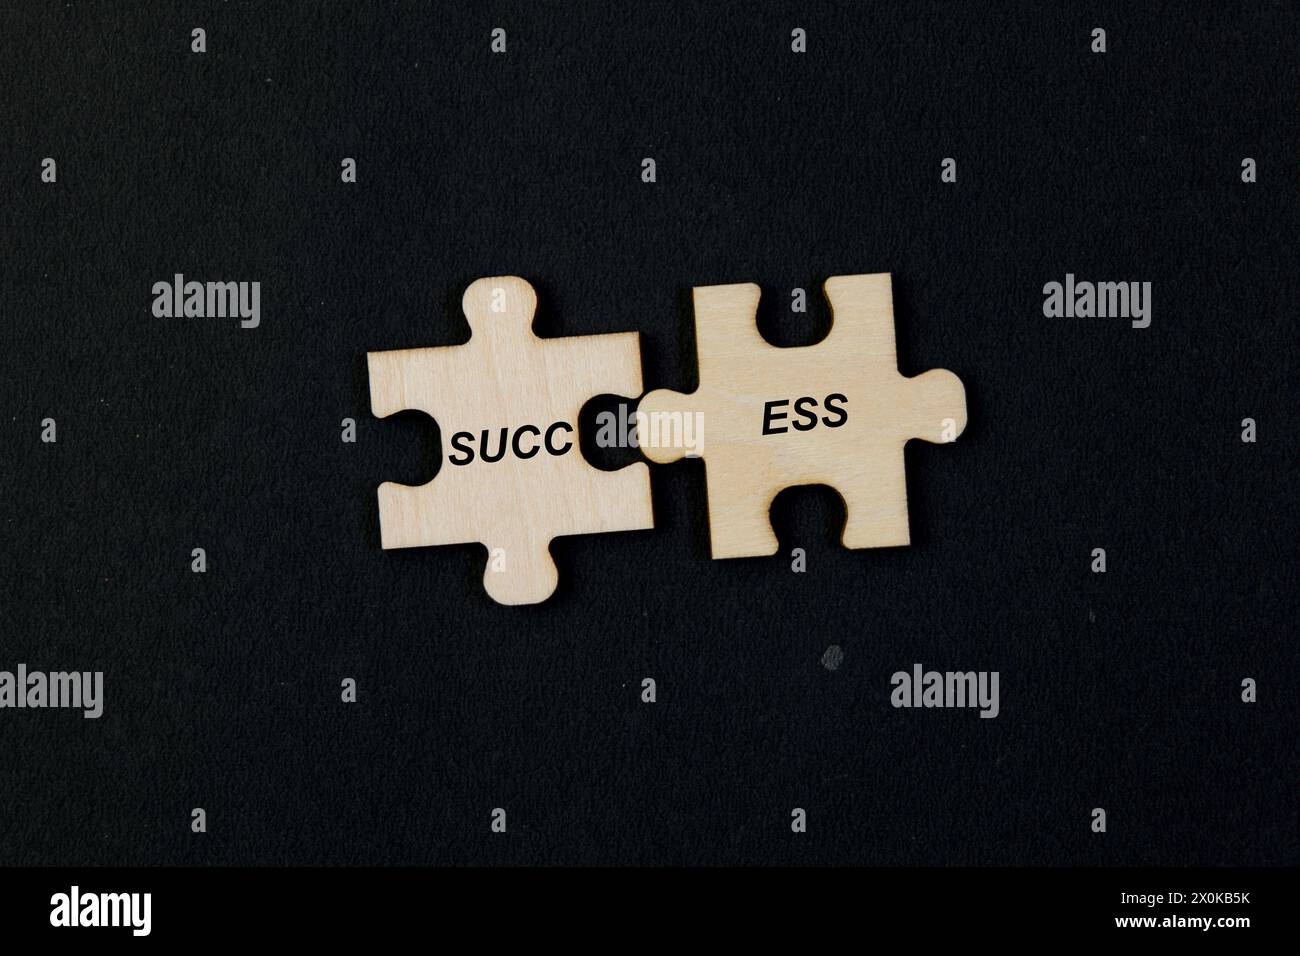 Image of jigsaw puzzle pieces coming together to form the word 'SUCCESS,' symbolizing the concept Stock Photo